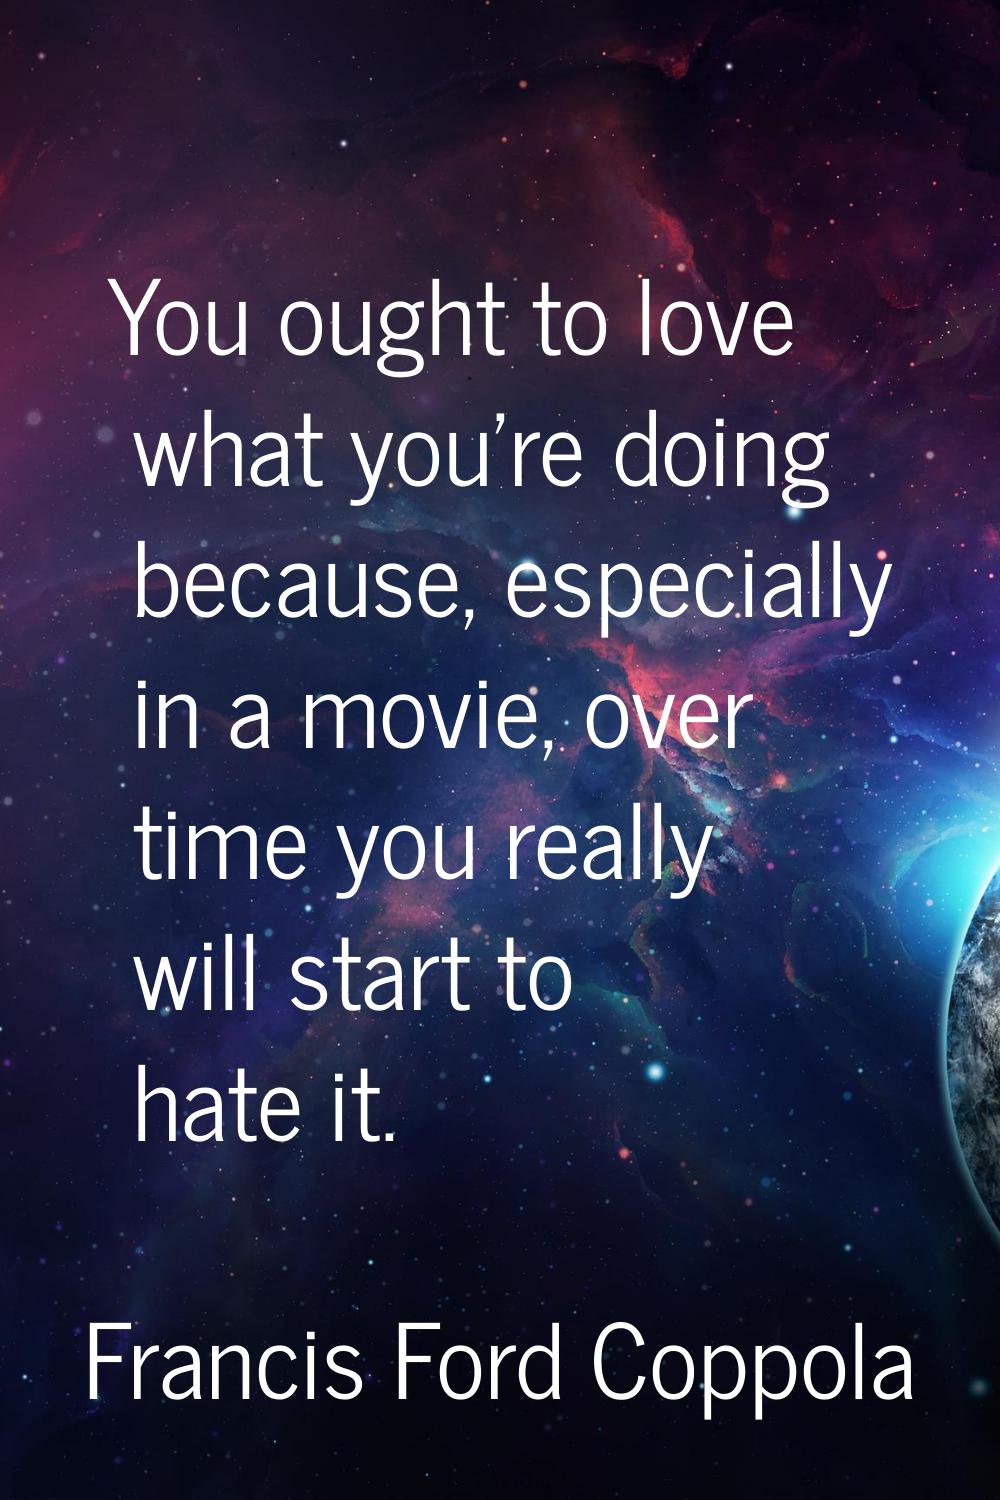 You ought to love what you're doing because, especially in a movie, over time you really will start